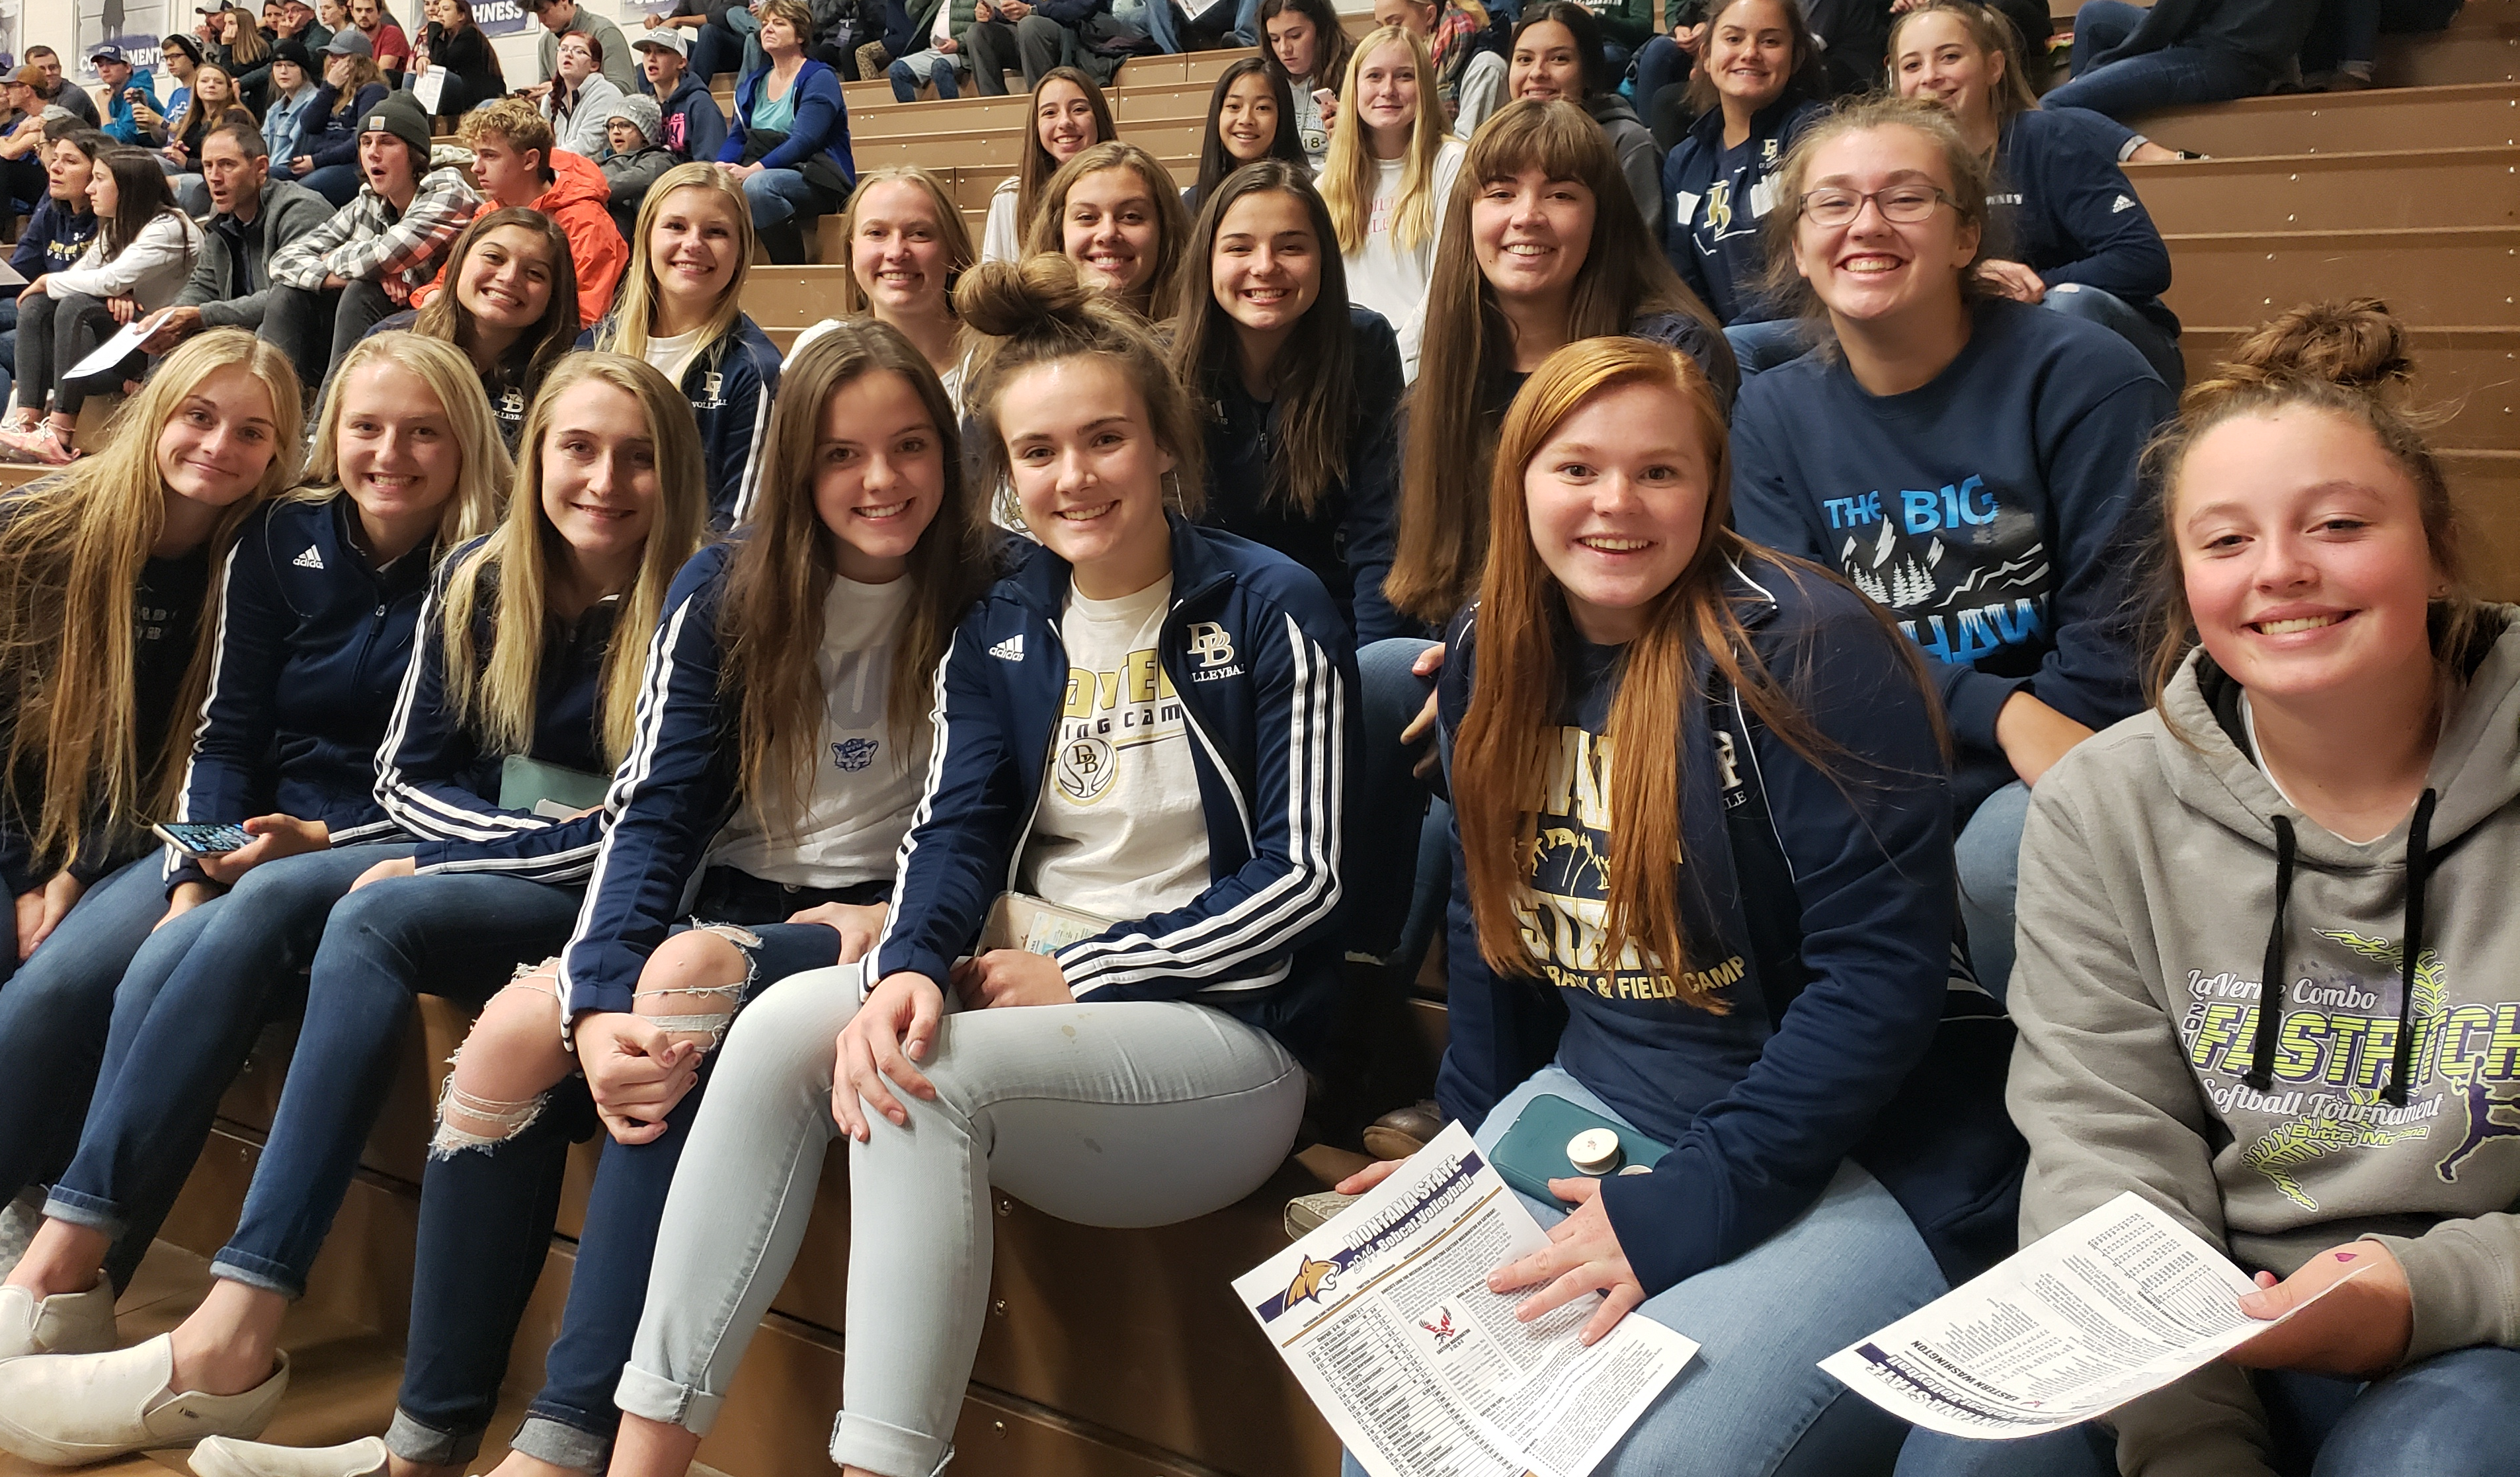 A photo of the volleyball team sitting in the stands enjoying watching some college volleyball